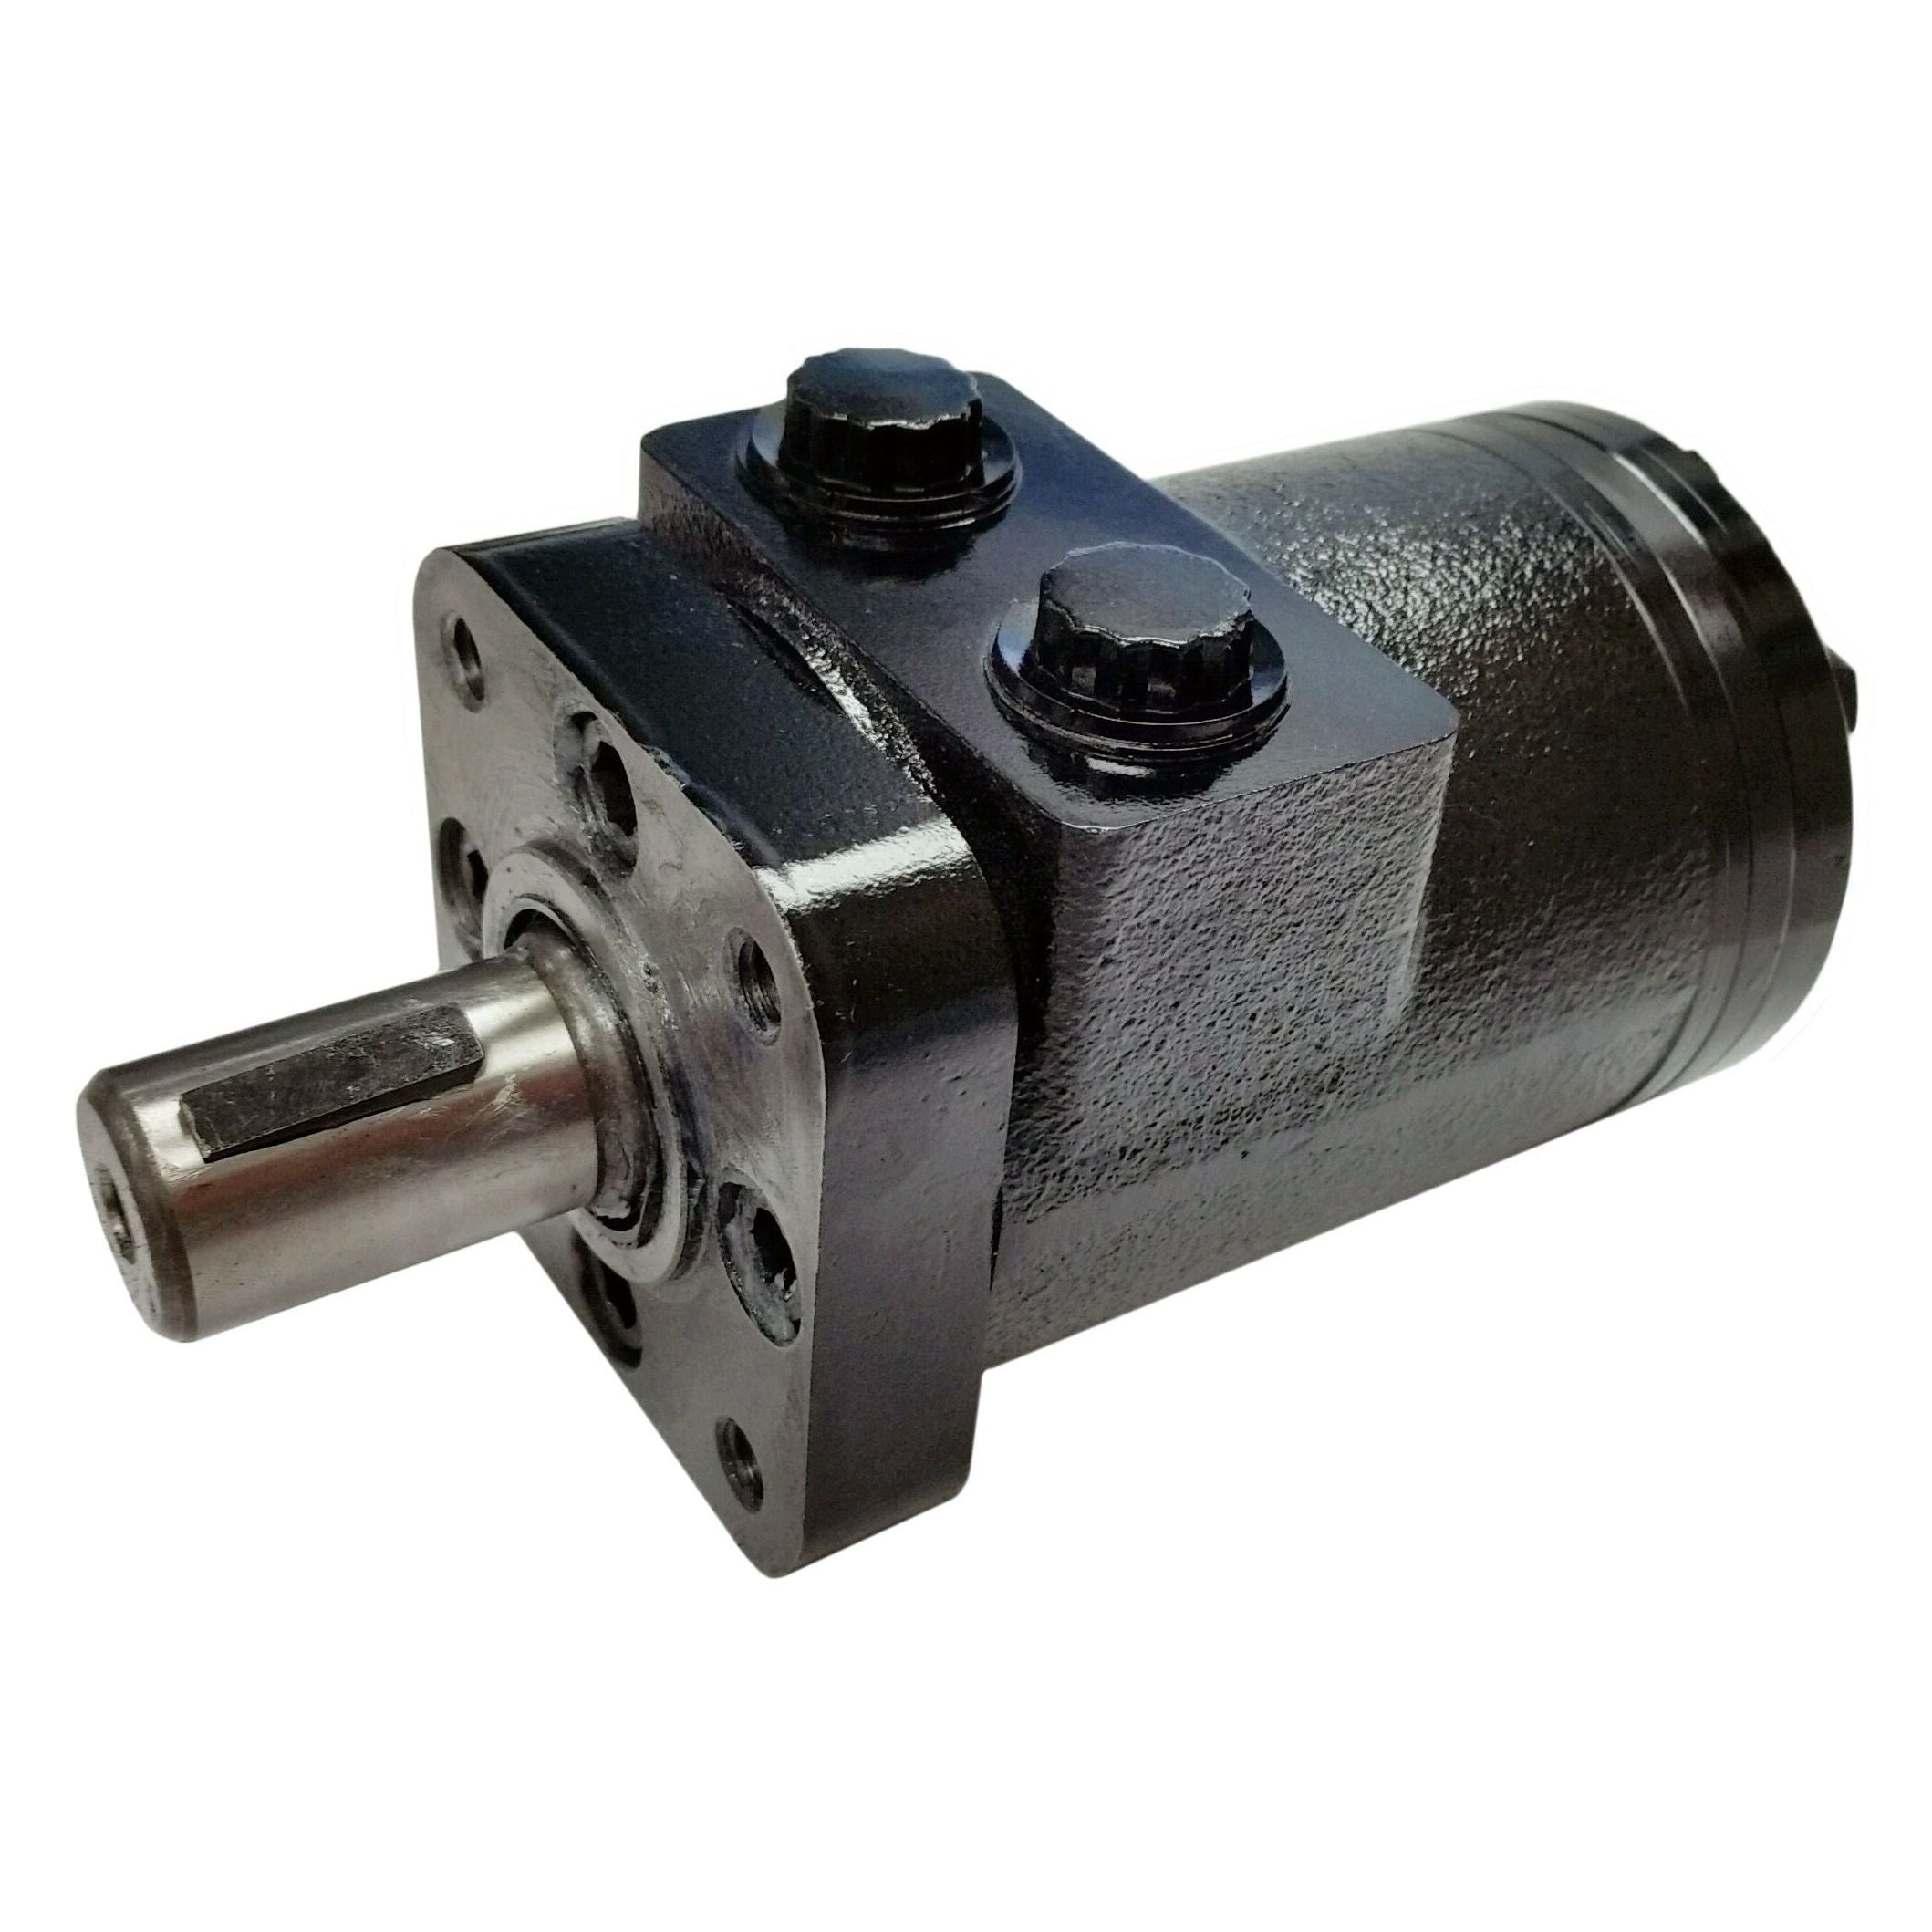 BMPH-125-H4-K-F : Dynamic LSHT Motor, 120cc, 490RPM, 2089in-lb, 2031psi Differential, 15.85GPM, SAE A 4-Bolt Mount, 1" Bore x 1/4" Key Shaft, Side Ported, Manifold